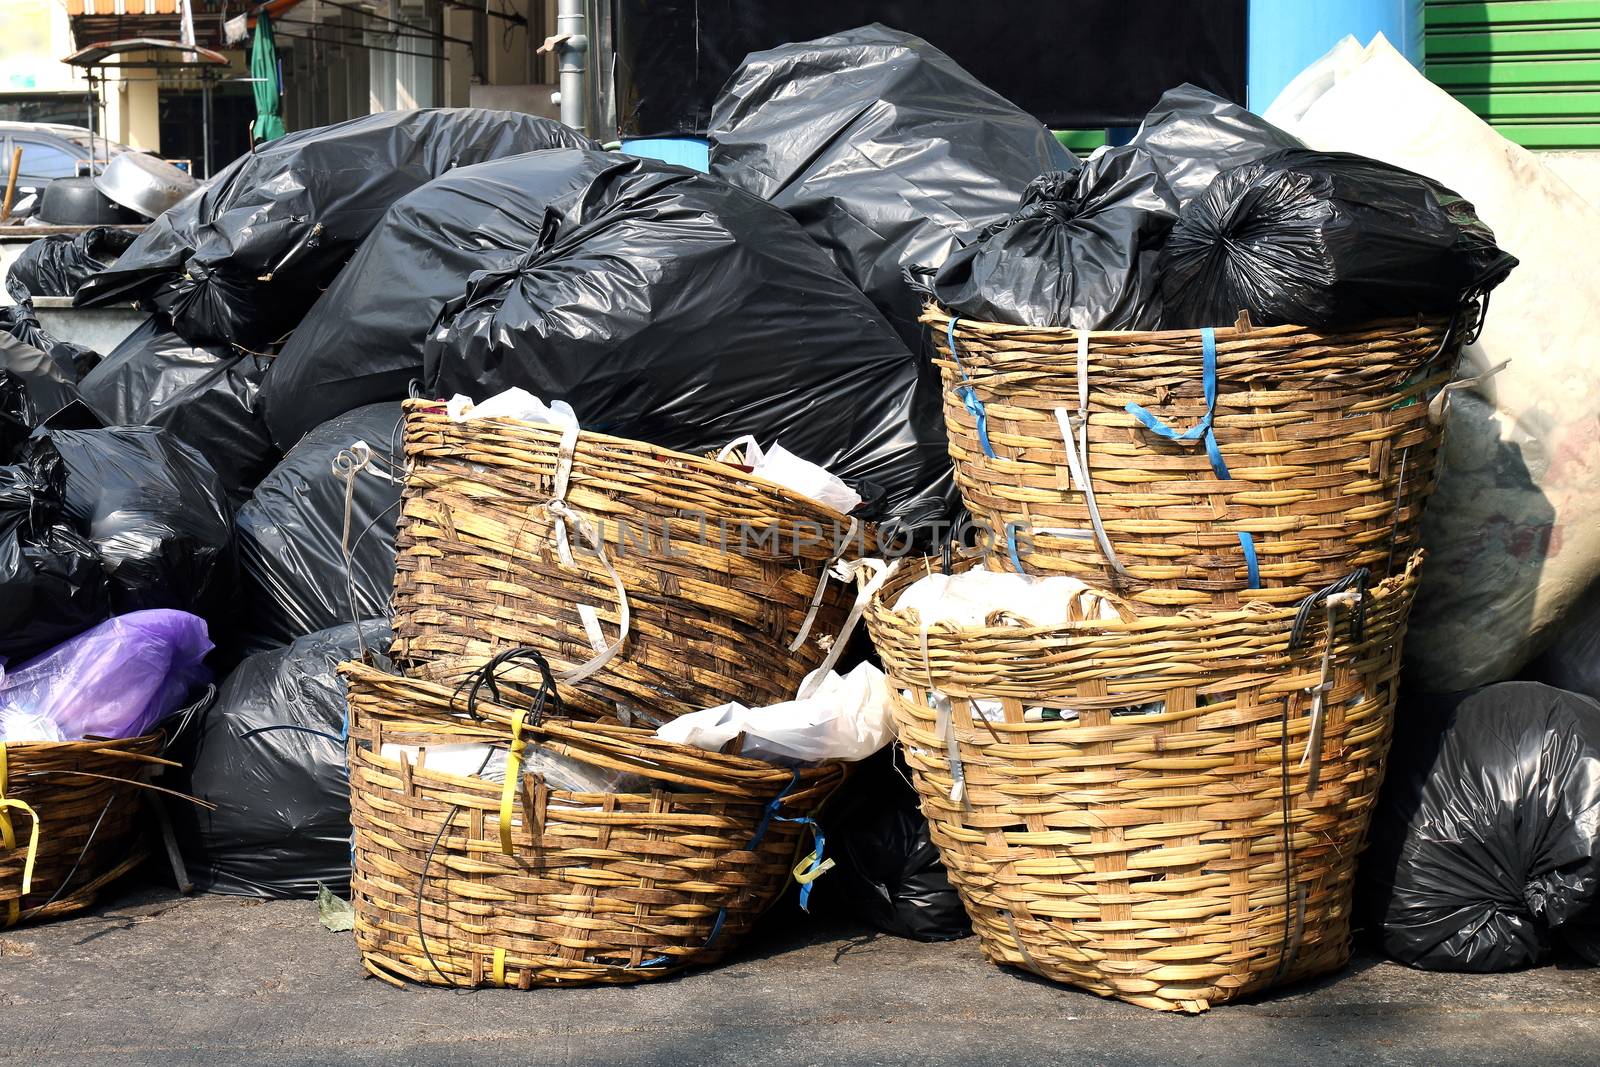 waste plastic junk in basket, pile garbage bamboo rattan baskets bags on the floor and many dump black plastic garbage bags by cgdeaw